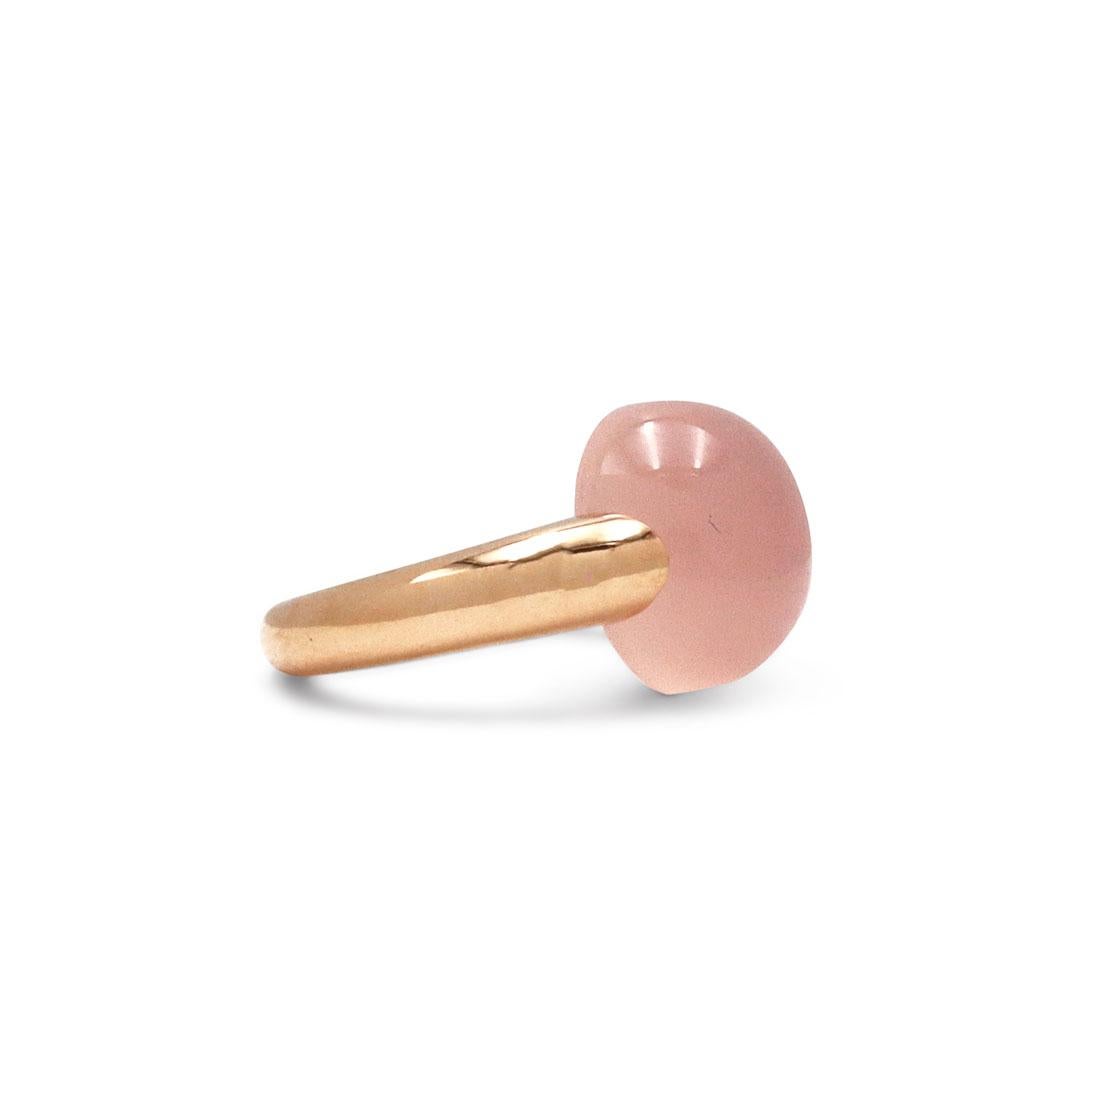 Authentic Pomellato 'Luna' ring crafted in 18 karat rose gold. Centering on a pearly opalescent quartz stone, the color and soft curve of the ring is truly reminiscent of the moon. Signed Pomellato, 750, with Italian hallmark and serial number. Ring